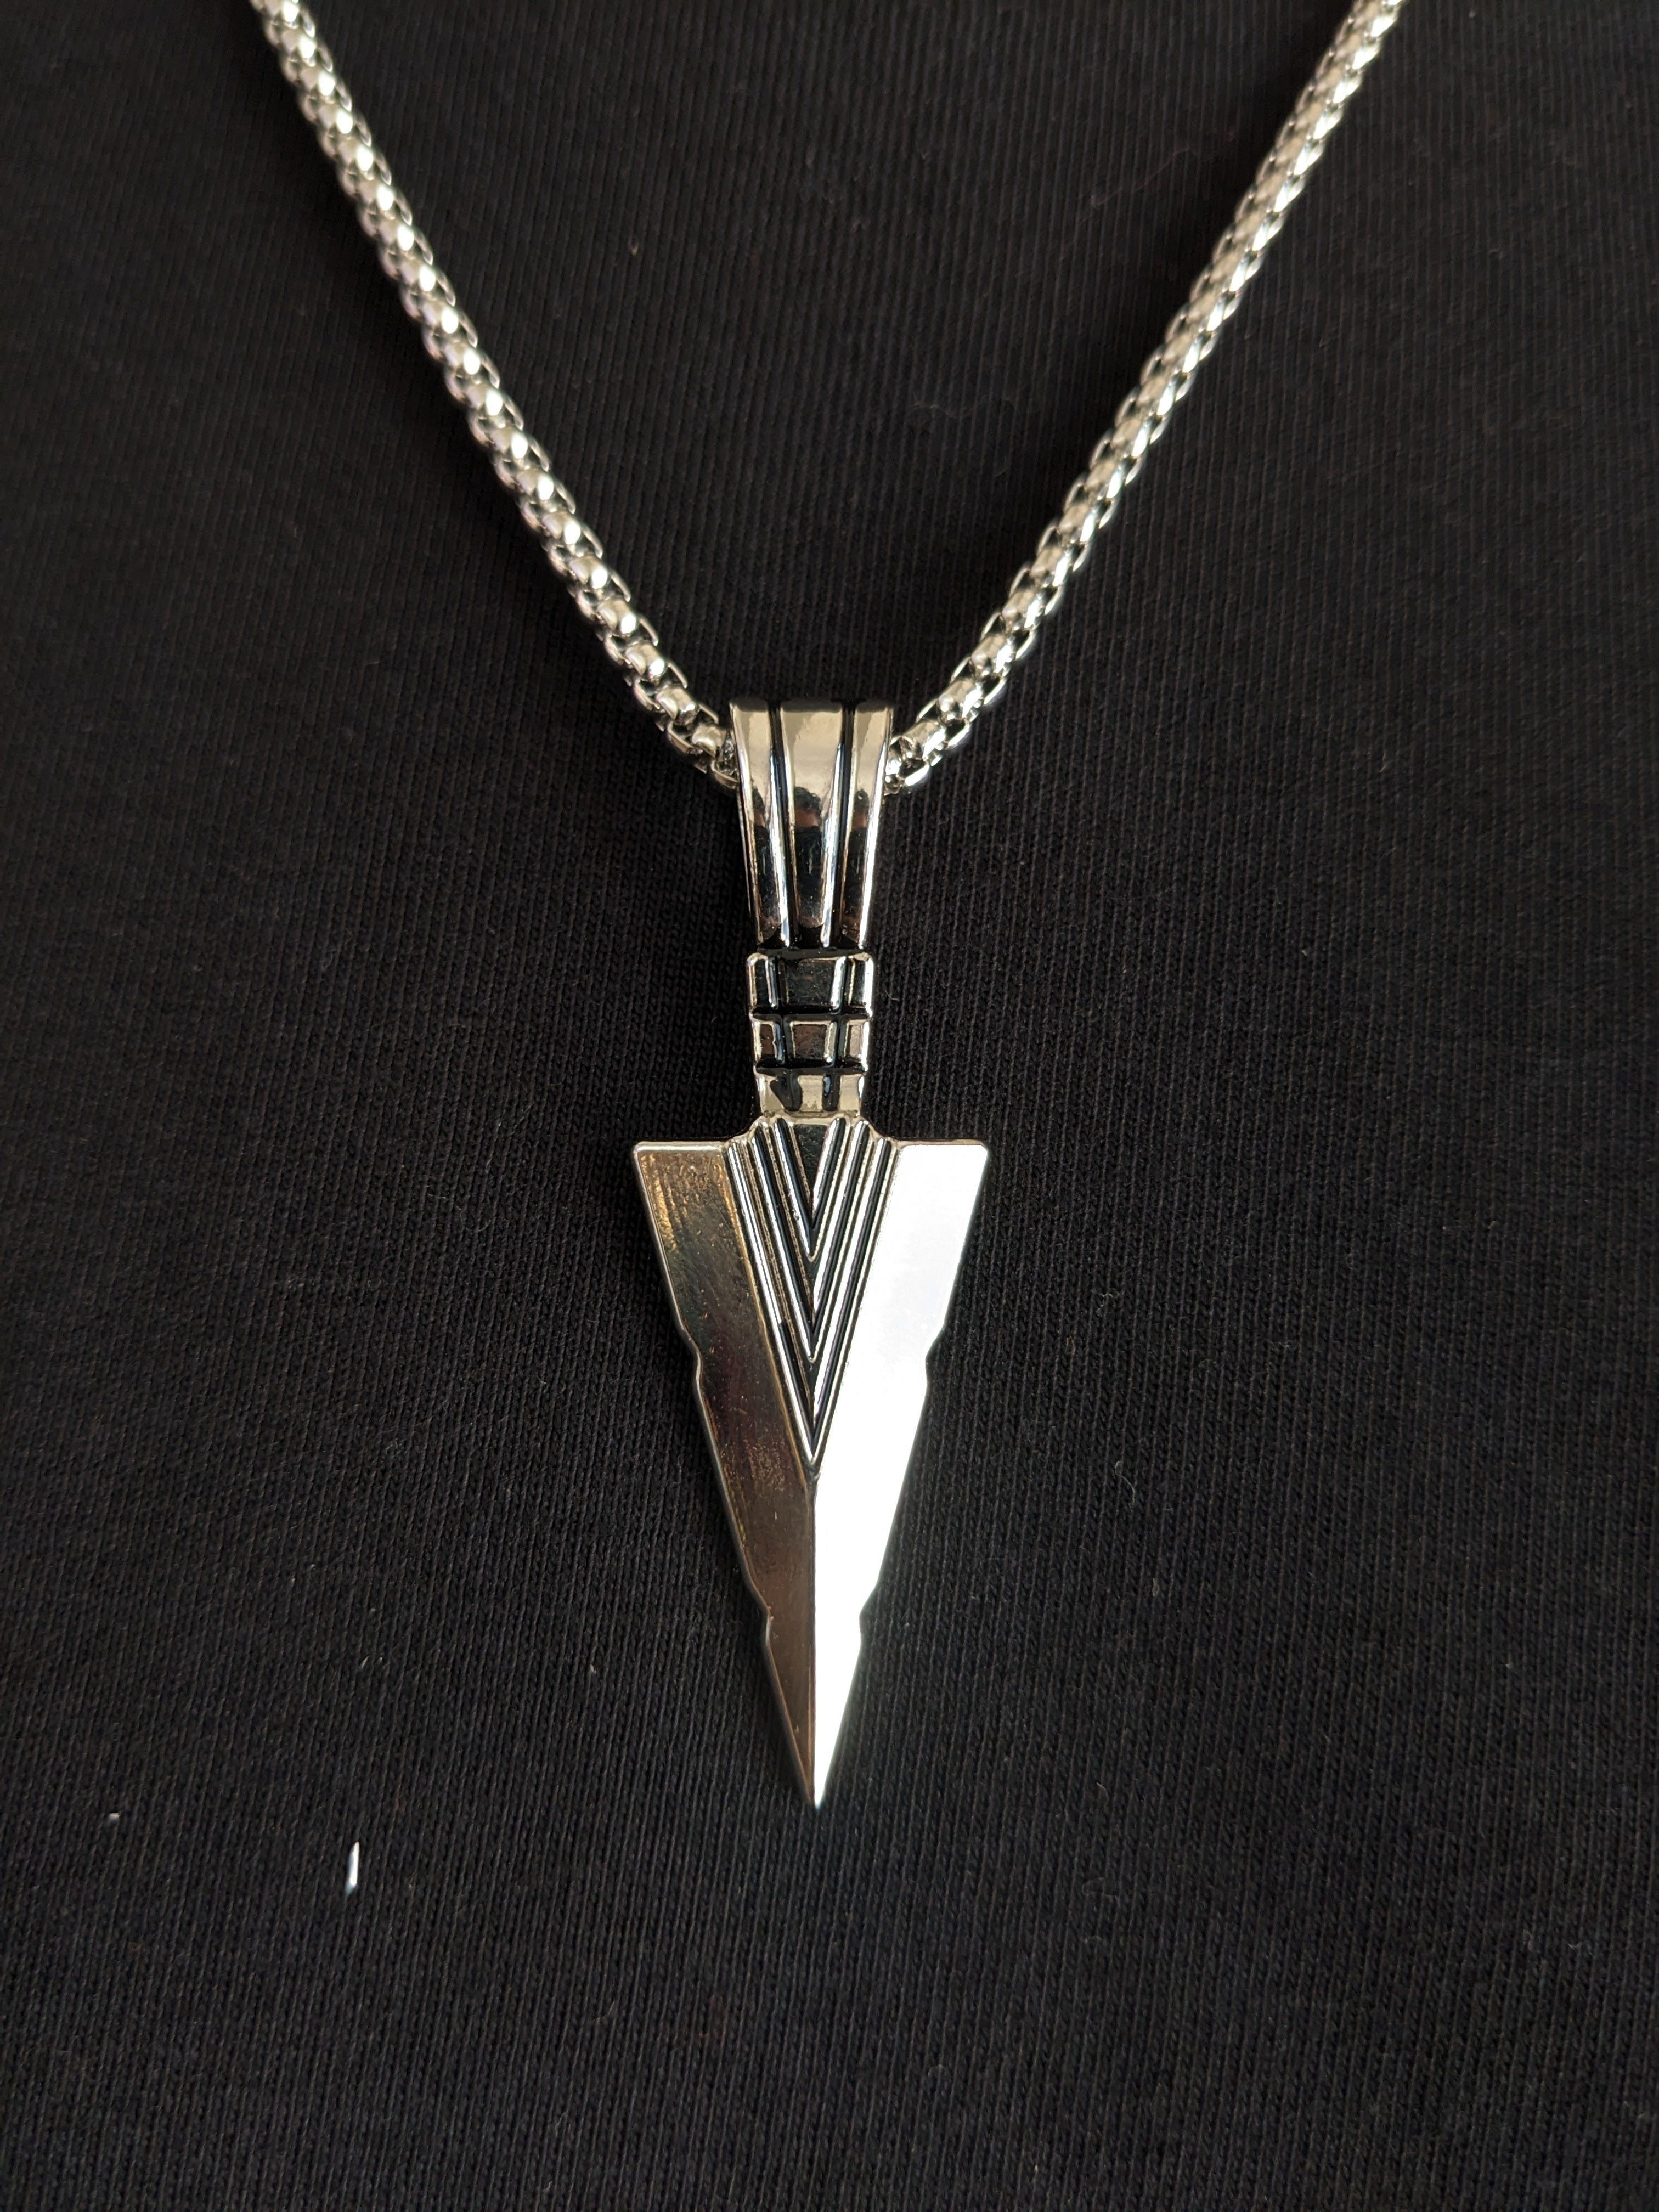 Silver Arrow head necklace - jewelry - by owner - sale - craigslist